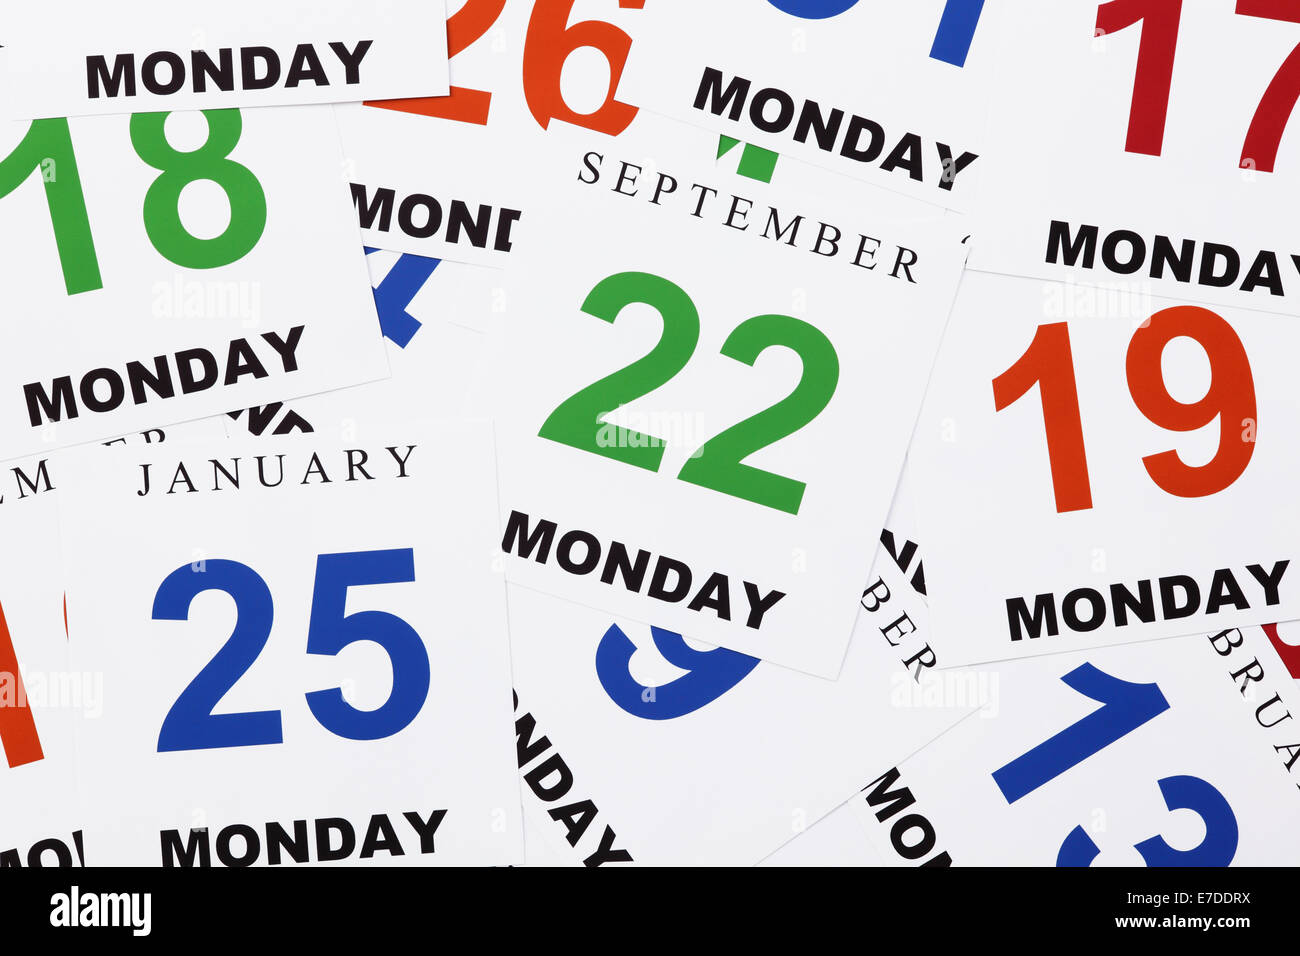 Monday calendar hires stock photography and images Alamy